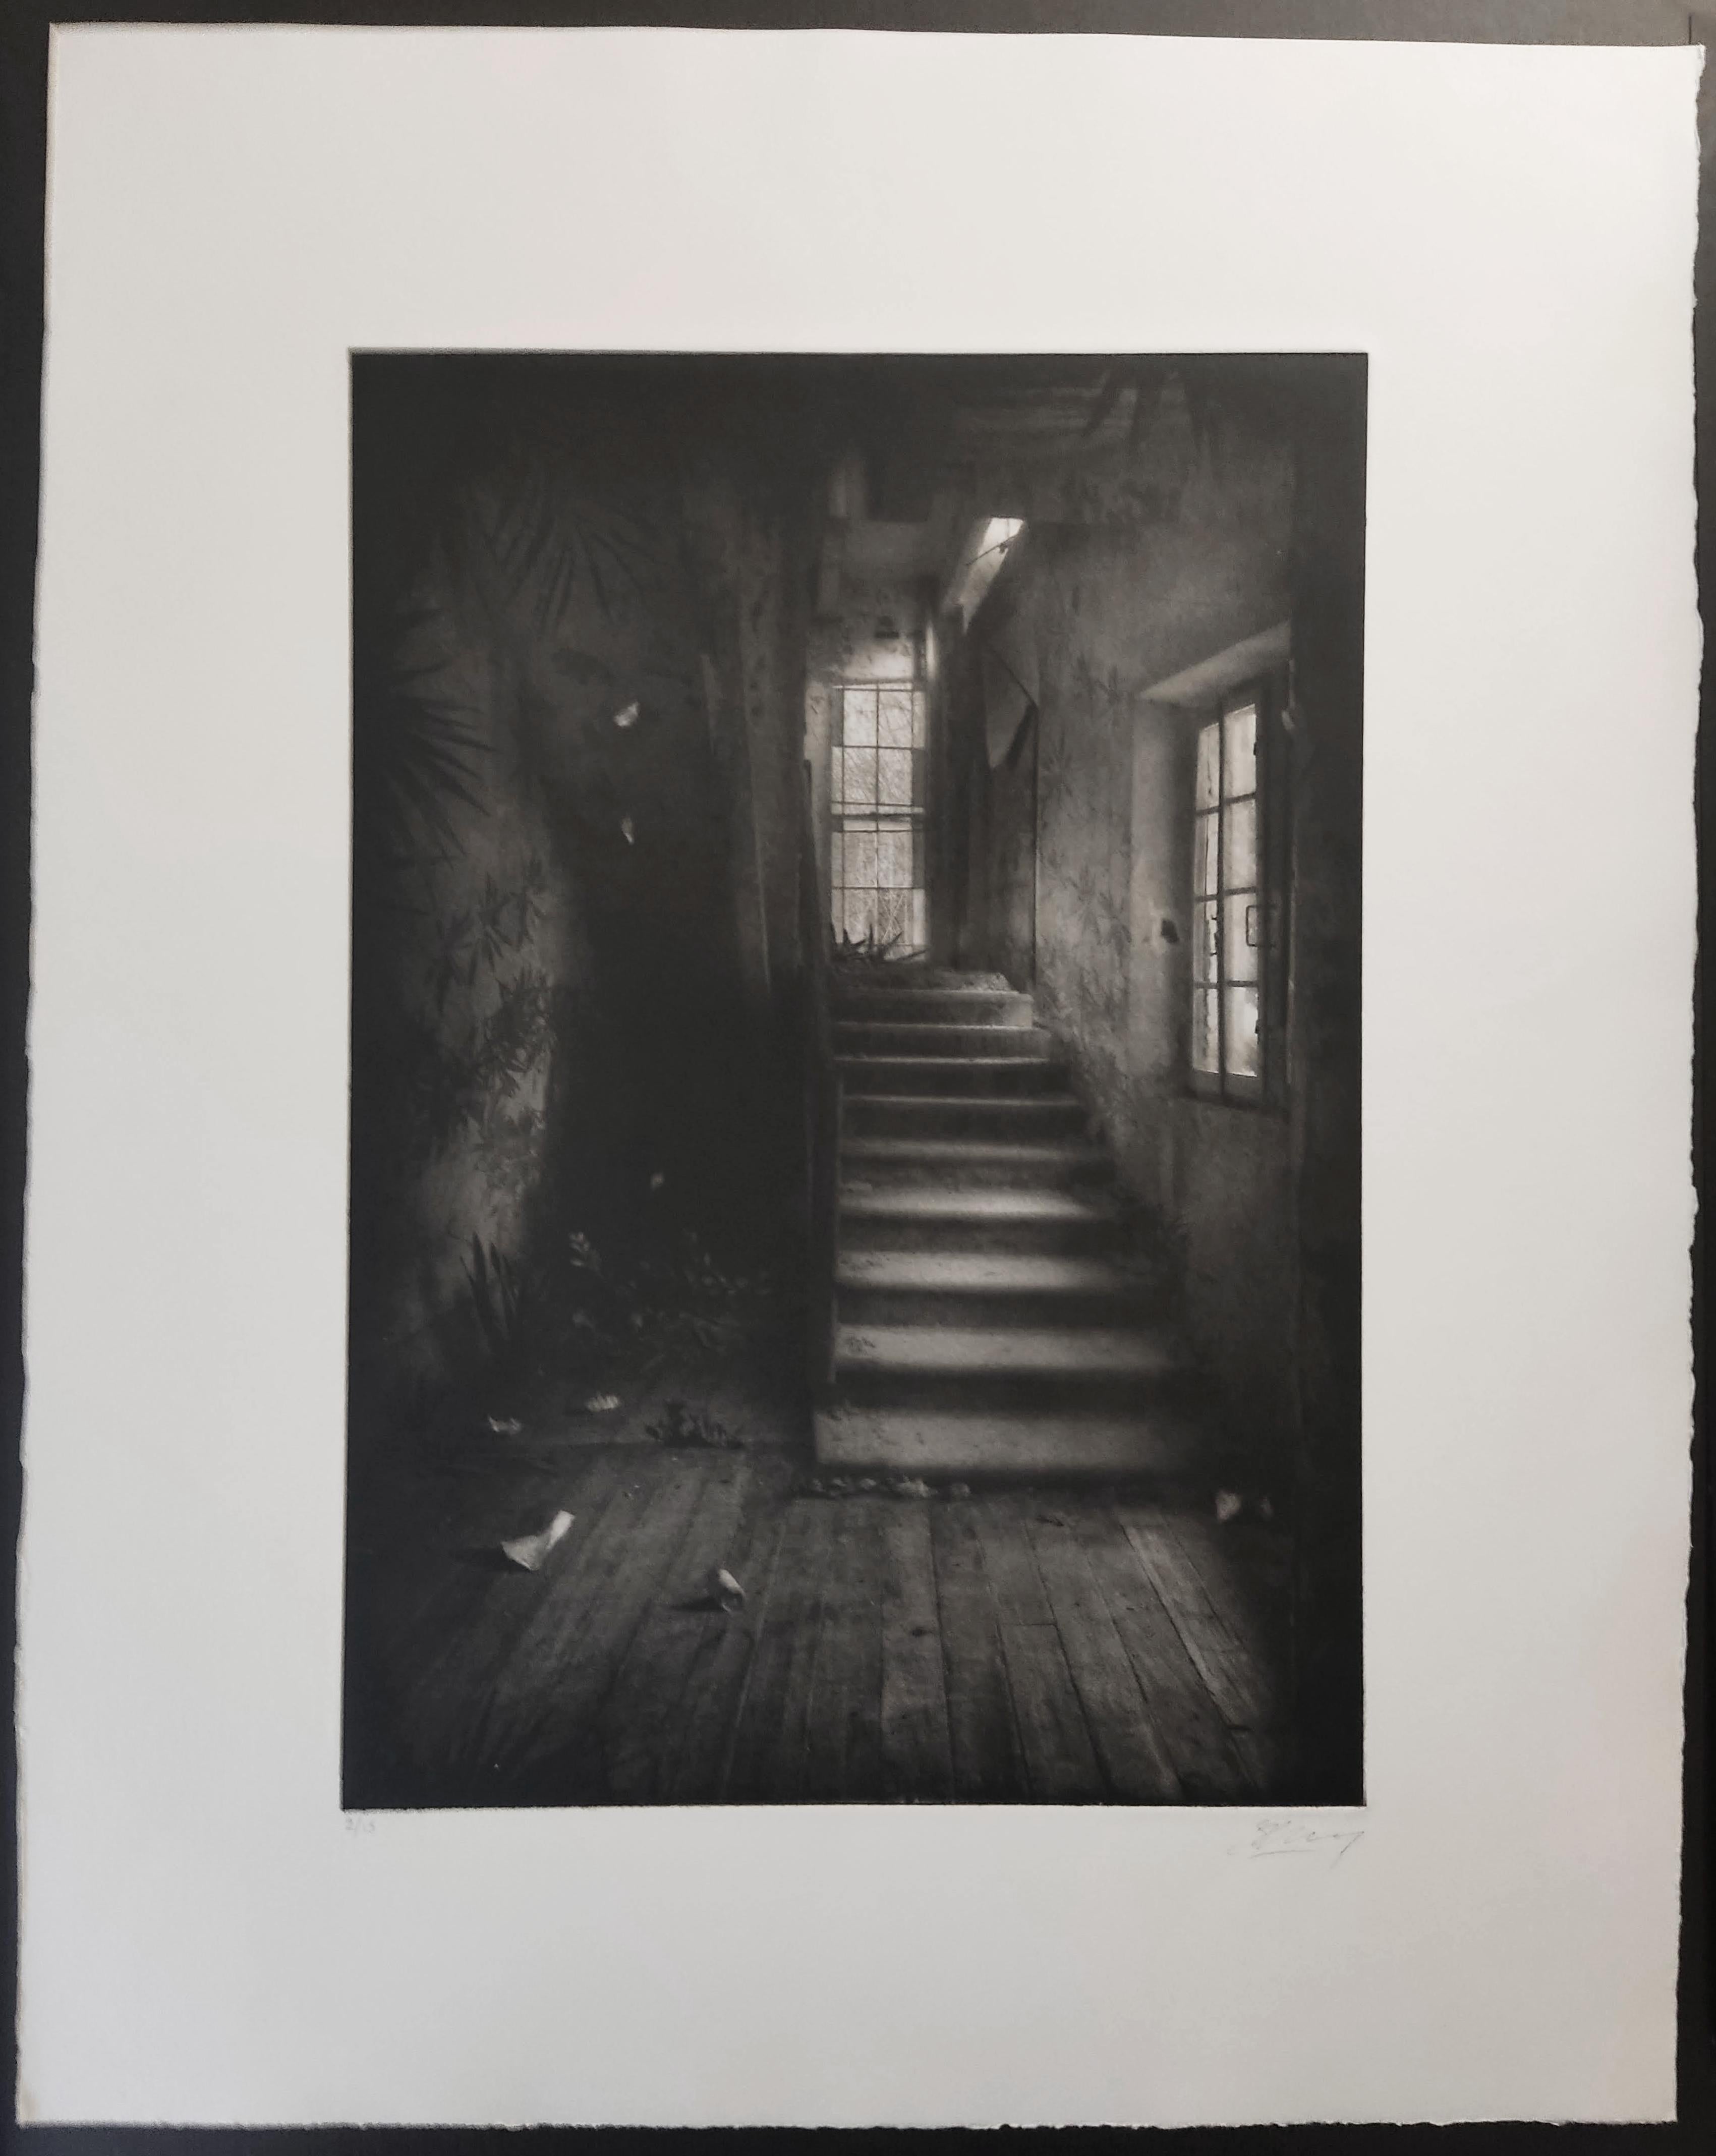 Stairway with Vegetation, Interior Staircase, Photomontage, Gravure, Etching - Print by Suzanne Moxhay